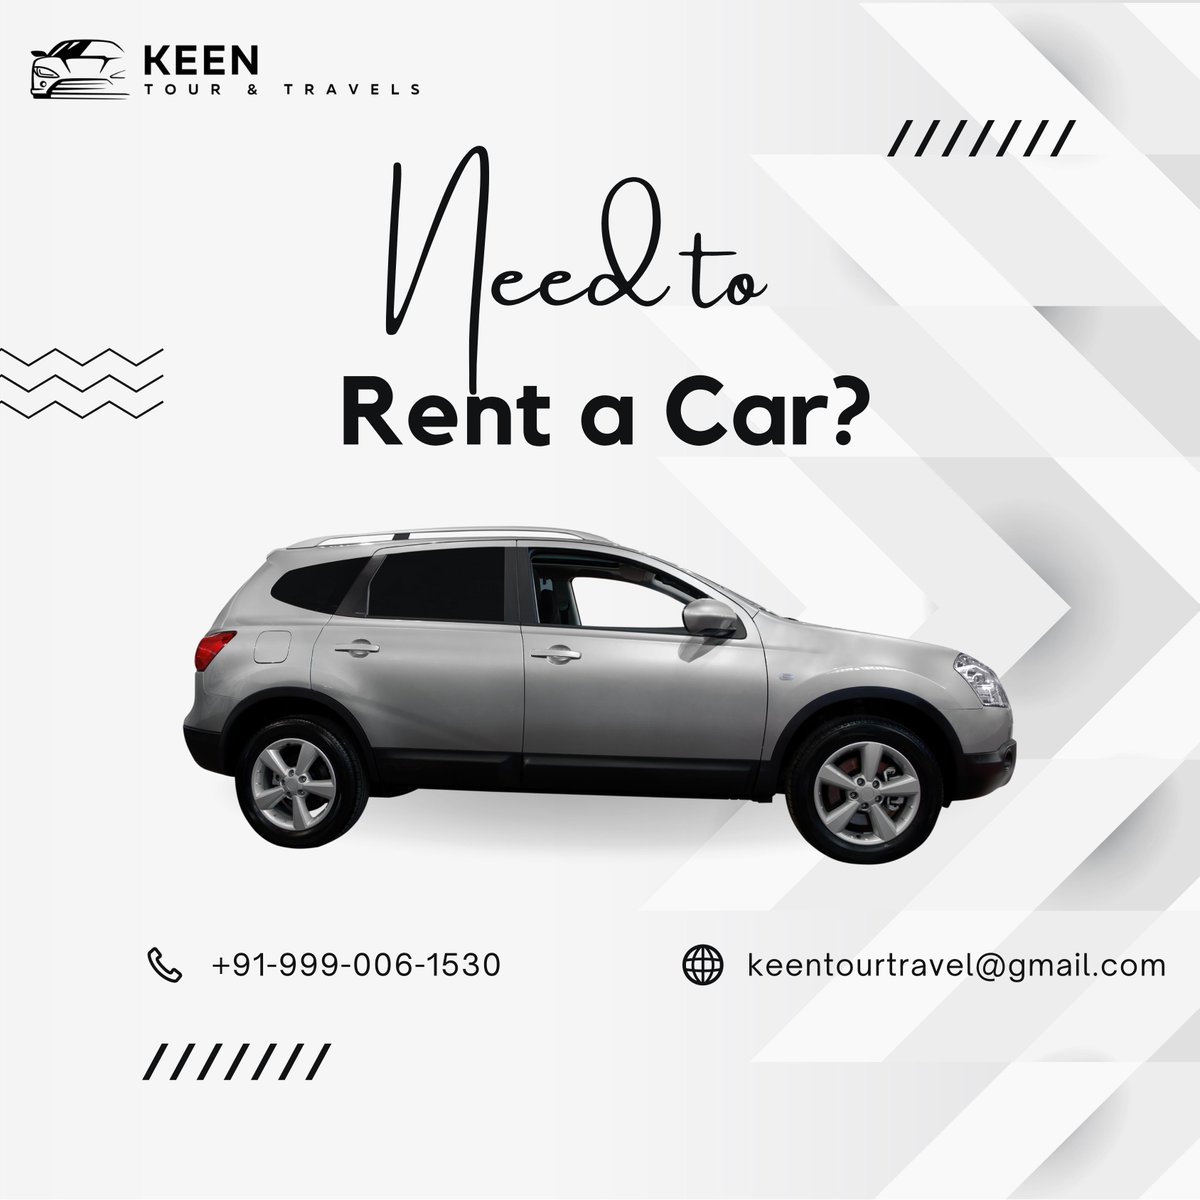 Simple, affordable, comfortable, security…… what else do you want in your car booking

#keen #tourstravel #keentourstravel #CarLovers
#CarEnthusiast #AutoLife #DriveMore
#CarJourney #Cruisin #CarObsession
#CarAddict #RideInStyle #OnTheRoadAgain